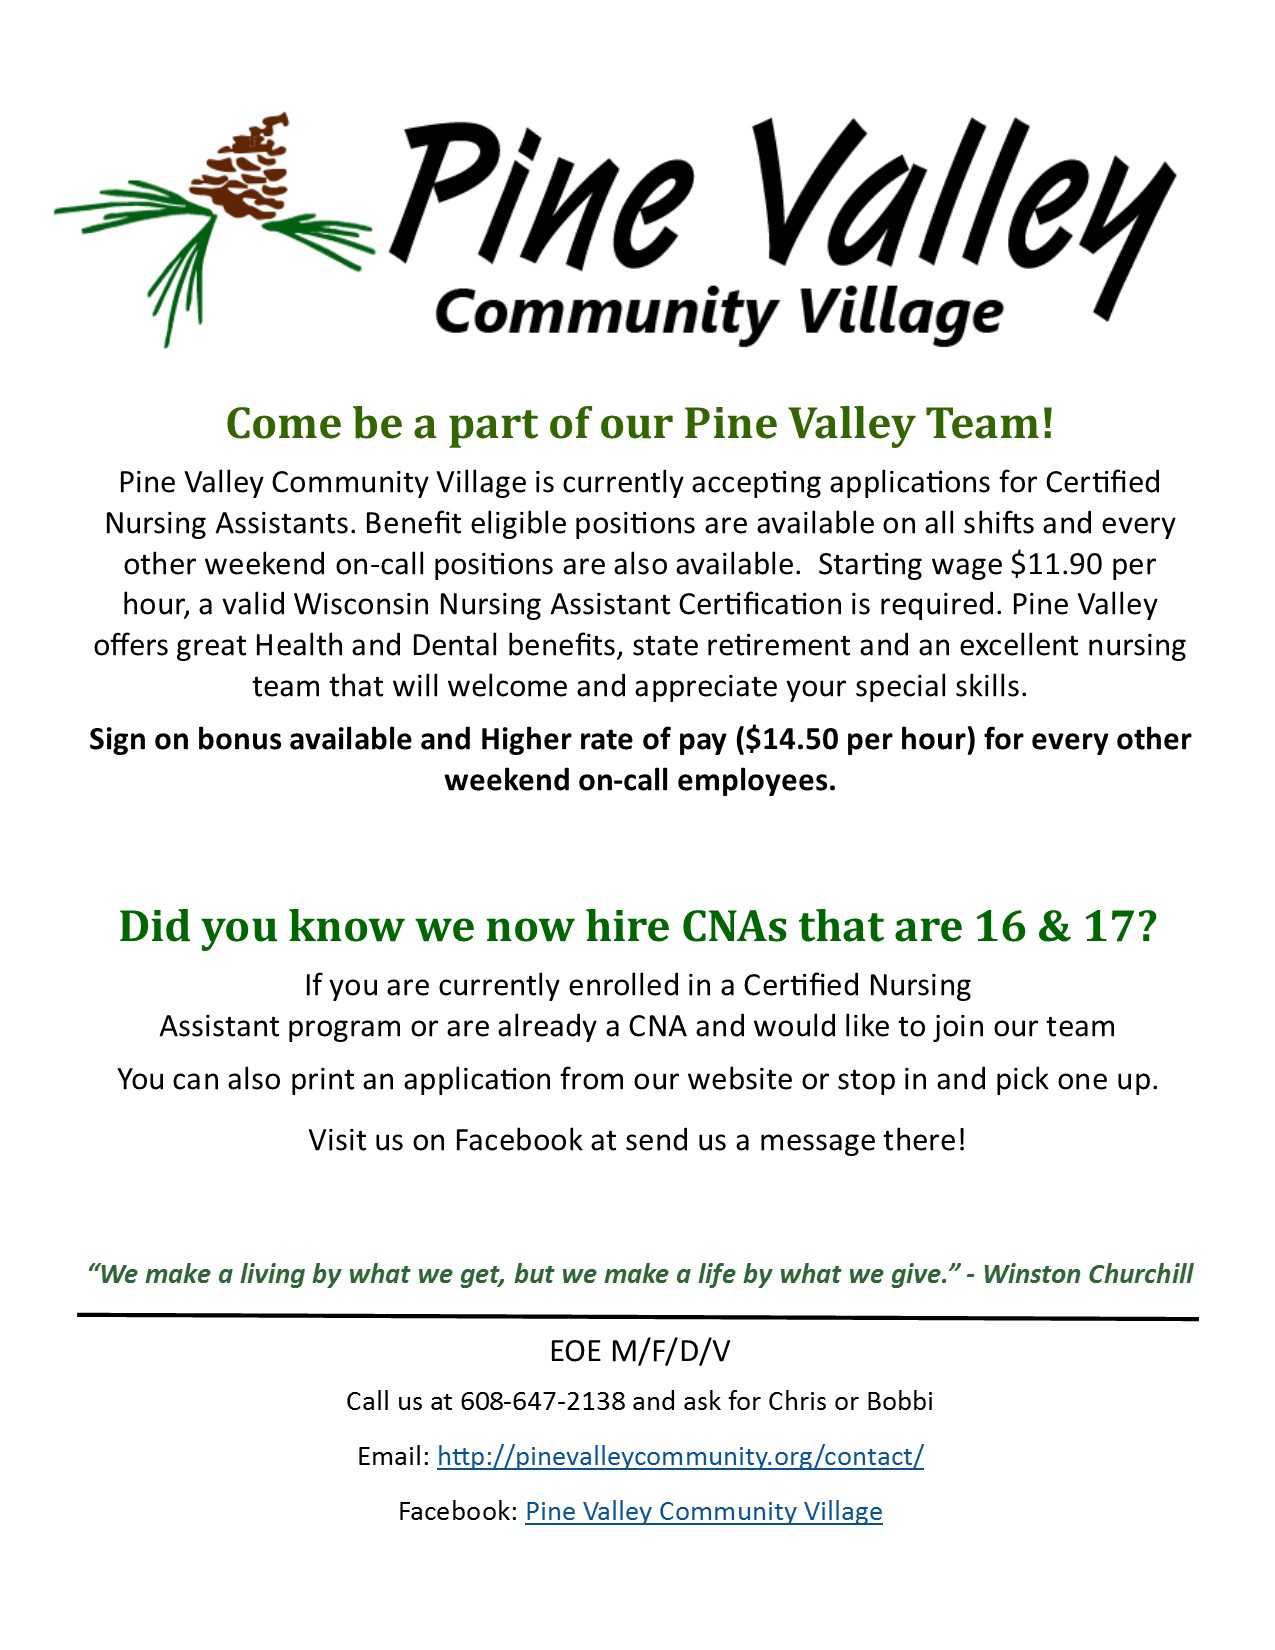 Come be a part of our Pine Valley Team! - Pine Valley ...